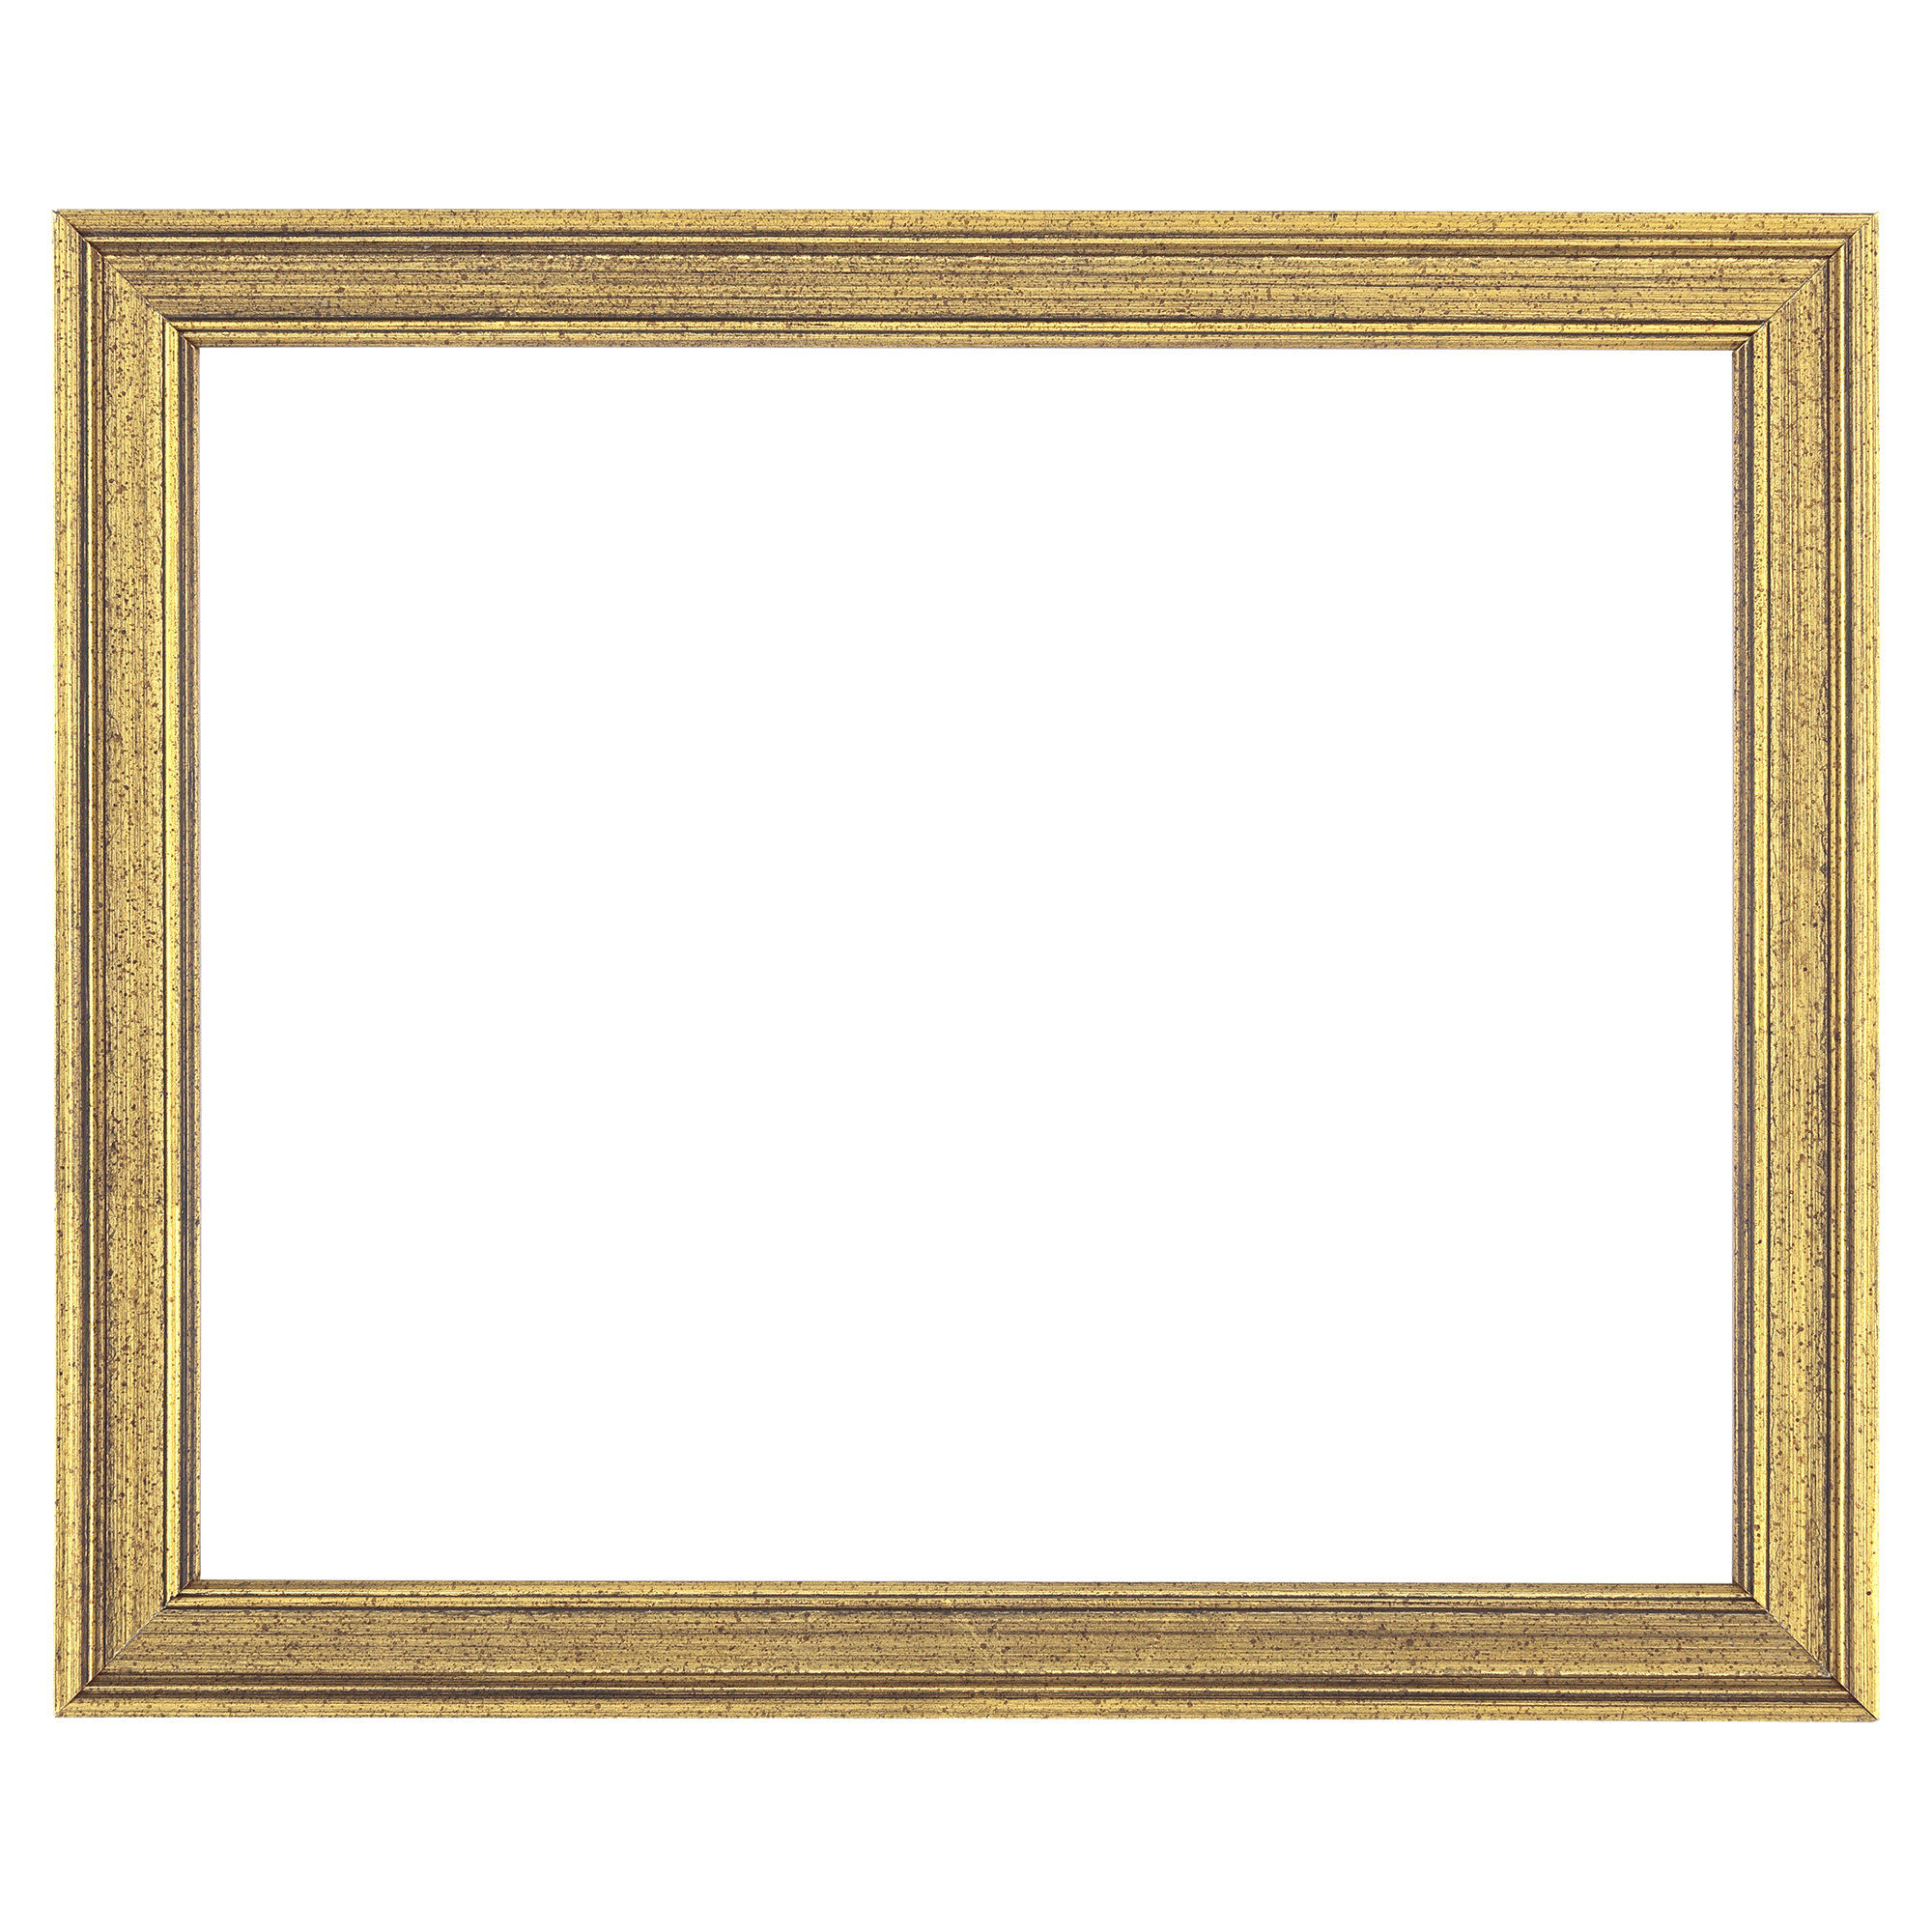 MUseum Collection Piccadilly Artist Vintage Picture Frames - 6x8 Gold - Single Frame for 3/4 Thick Canvas, Paper and Panels, Museum Quality Wooden Antique Photo Frame - image 1 of 4